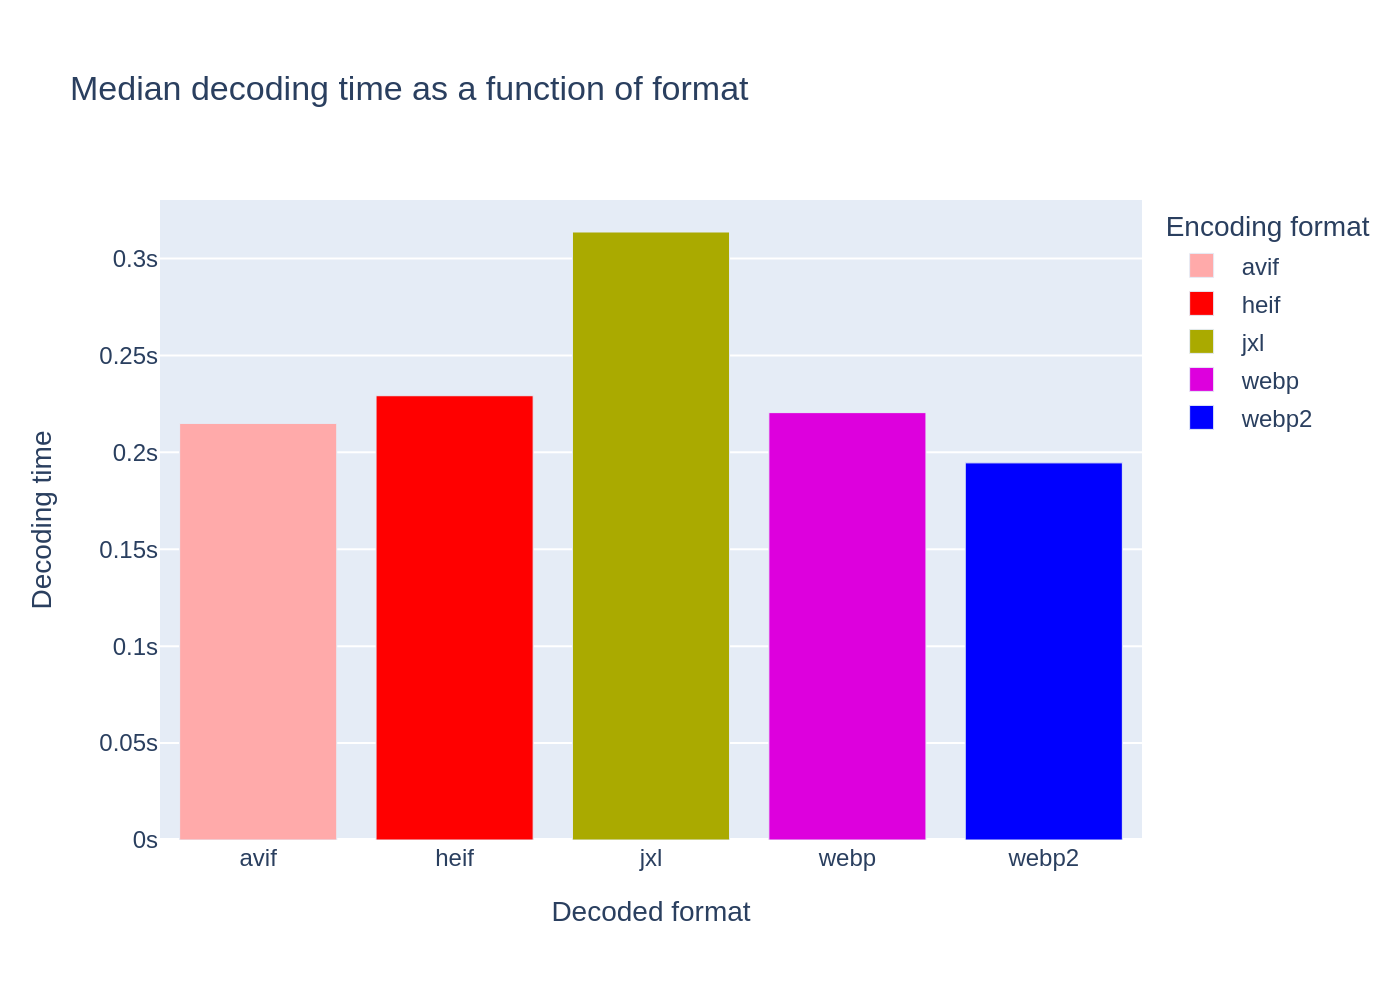 Median decoding time by decoder.